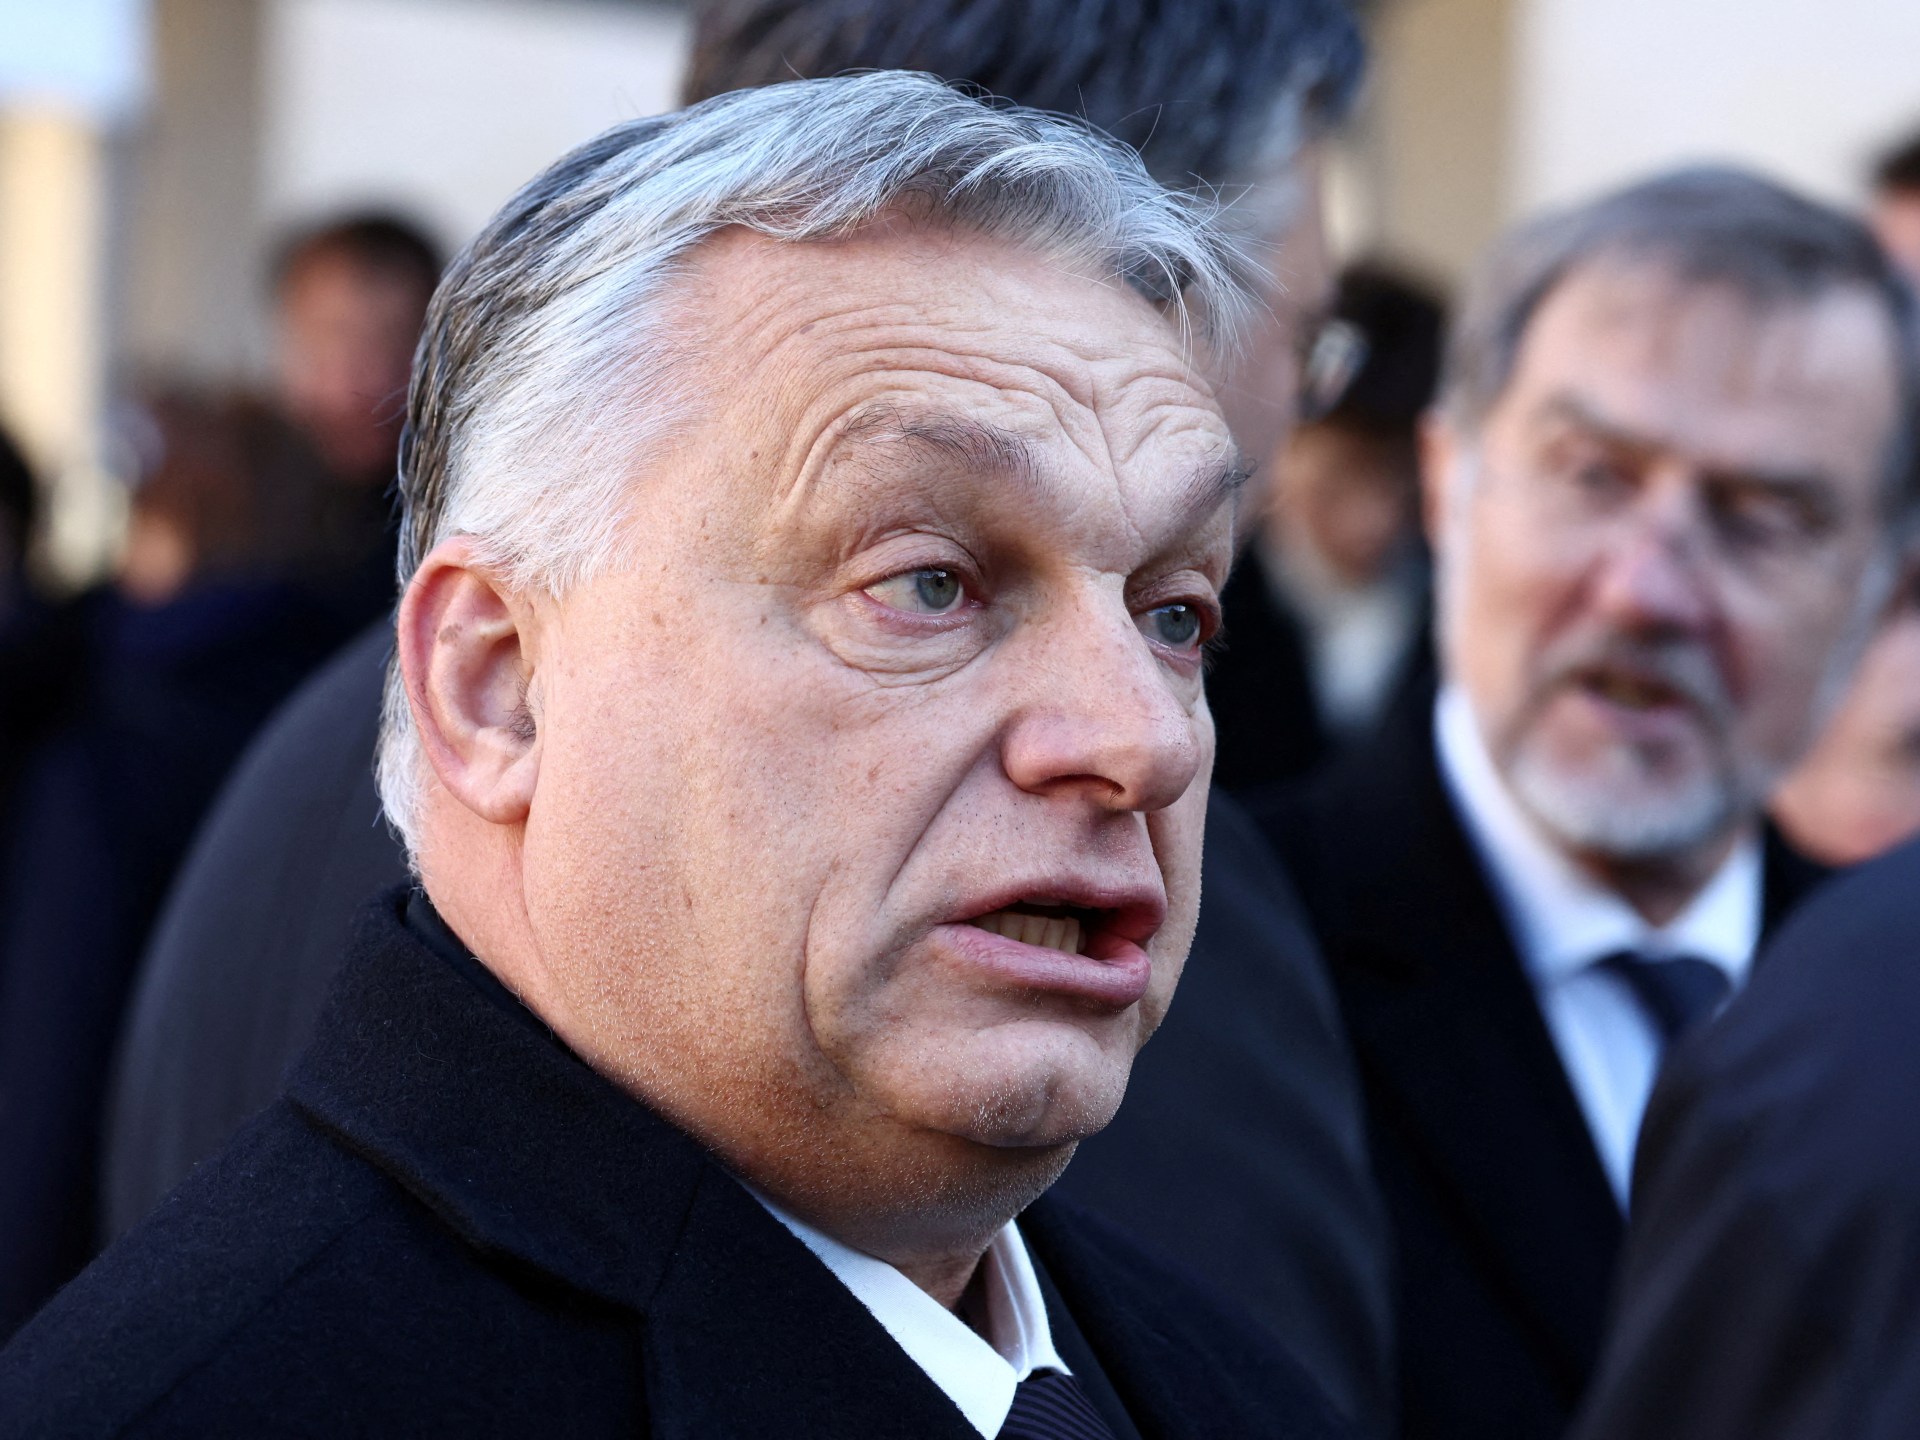 EU lawmakers push on with move to try and limit Hungary’s voting rights